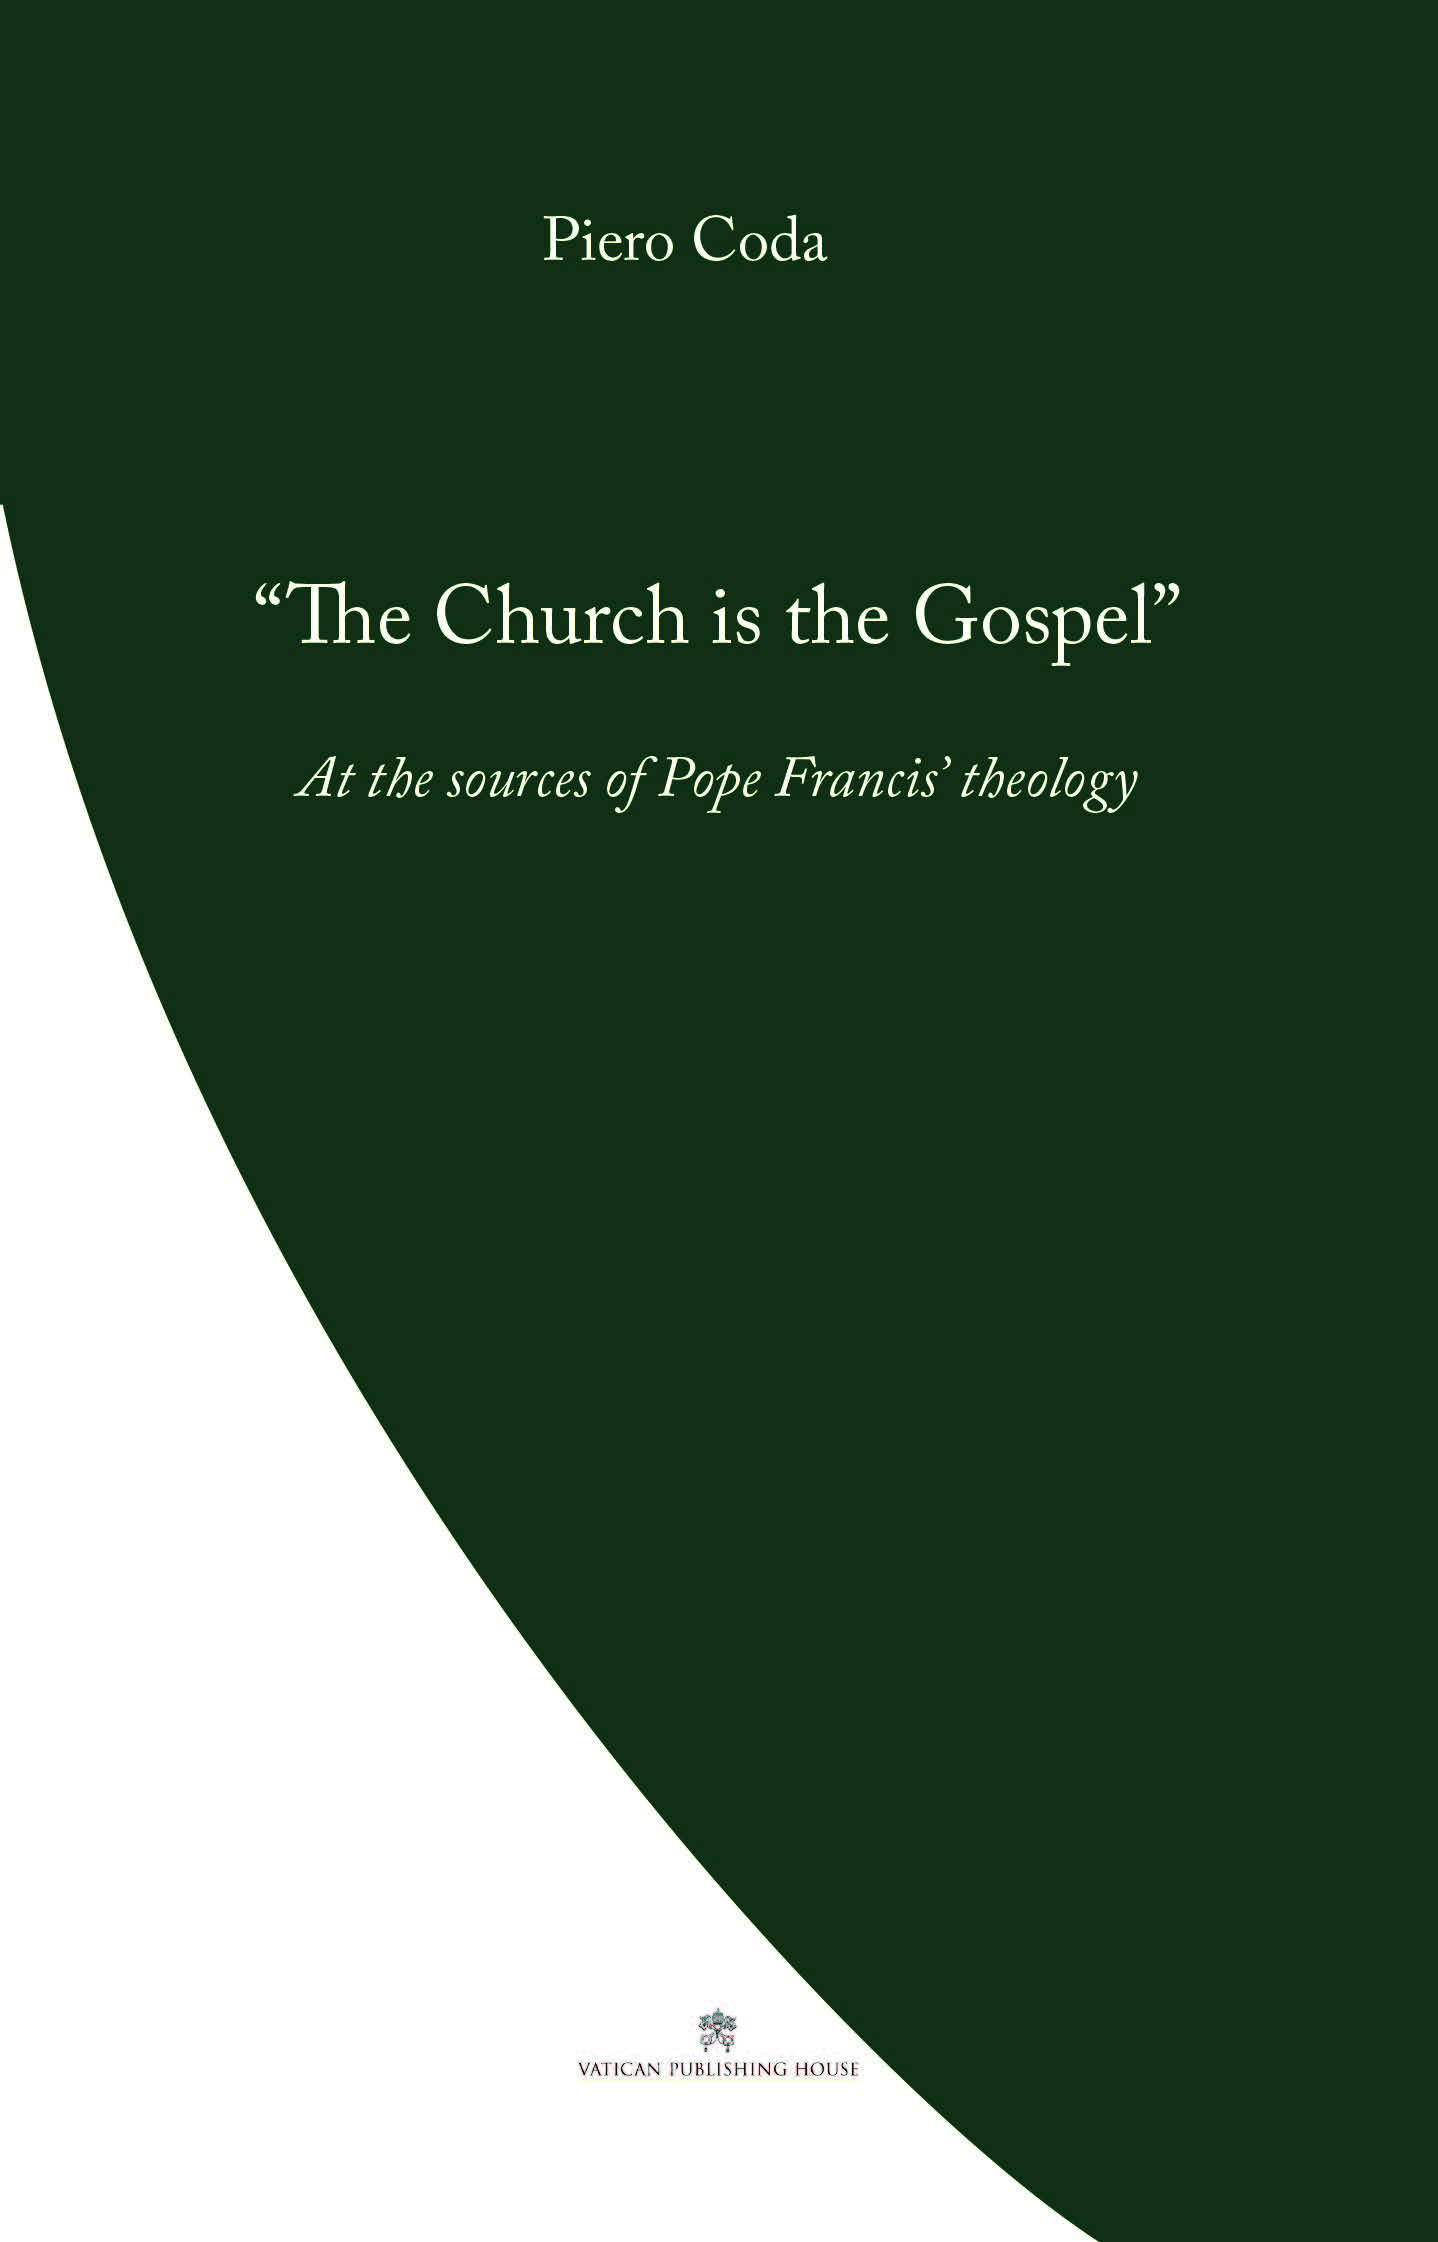 The Church is the Gospel At the sources of Pope Francis' theology / Piero Coda